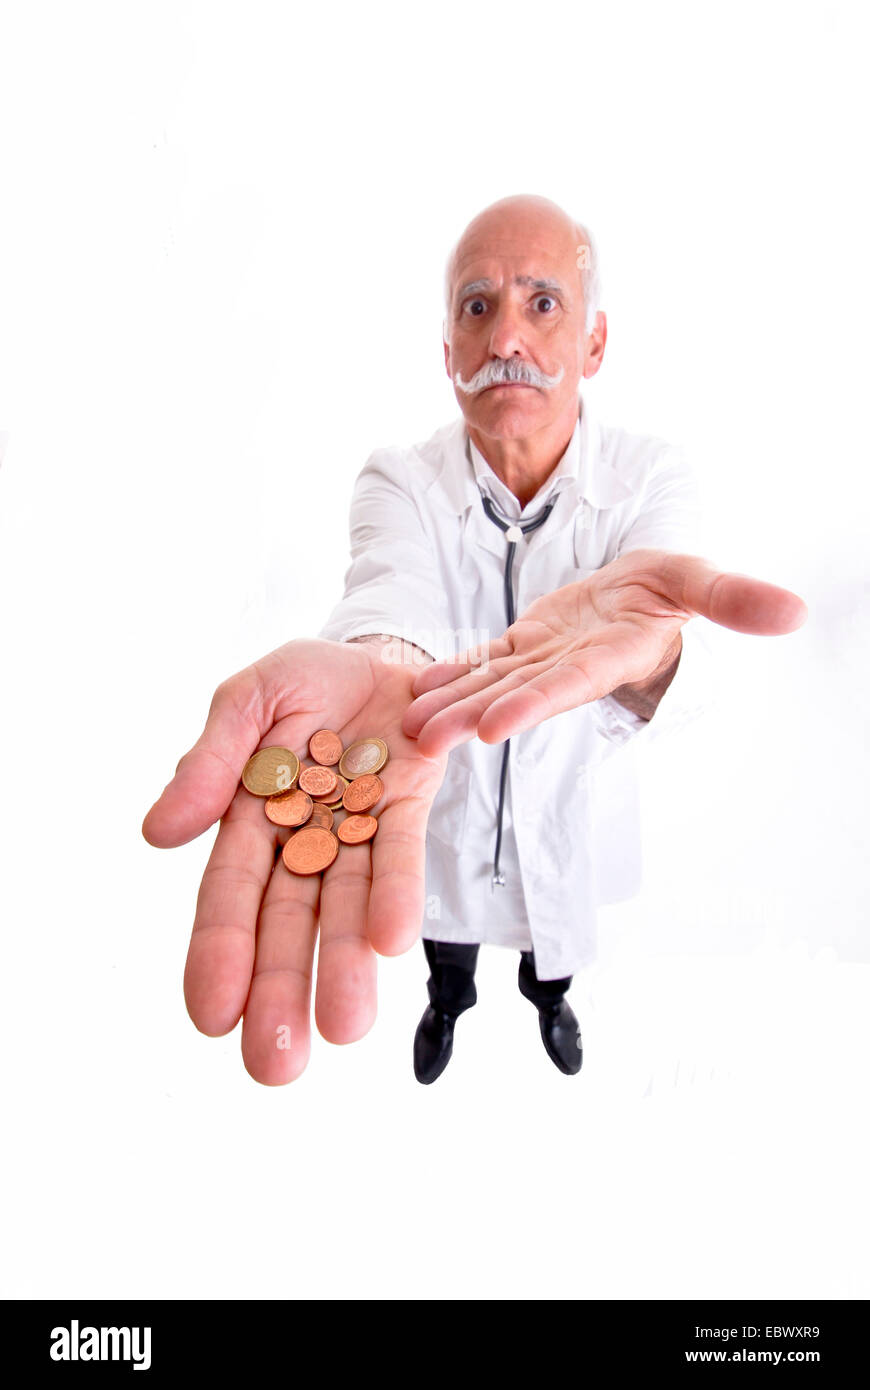 doctor thinks he earns to less money Stock Photo